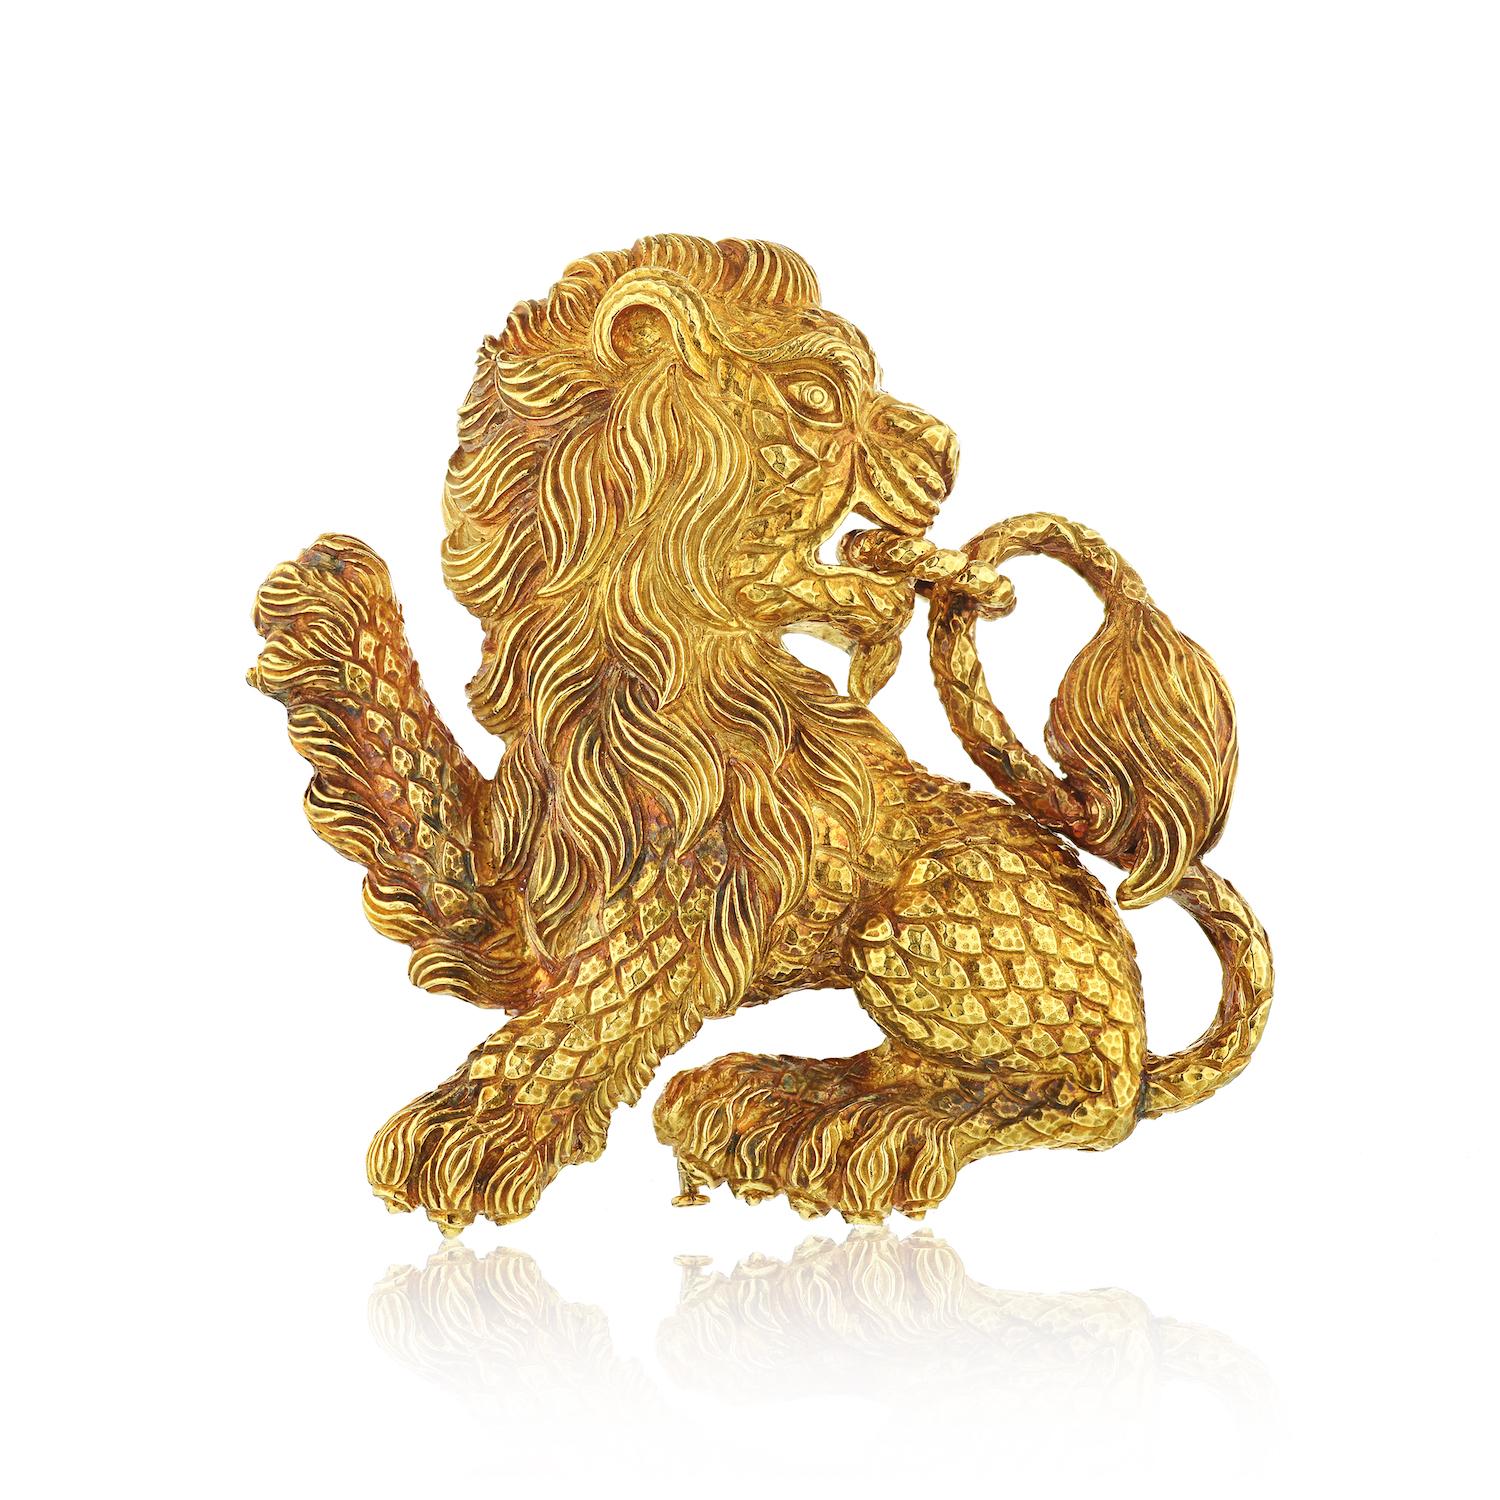 18 kt., the pawing lion biting a twisted oval link chained to its tail, decorated with detailed body and textured mane, signed Webb, approximately 71.7 dwts.
L: 8cm
W: 7.5cm
Double pin fastening. 
Can be worn as a large pendant as well.